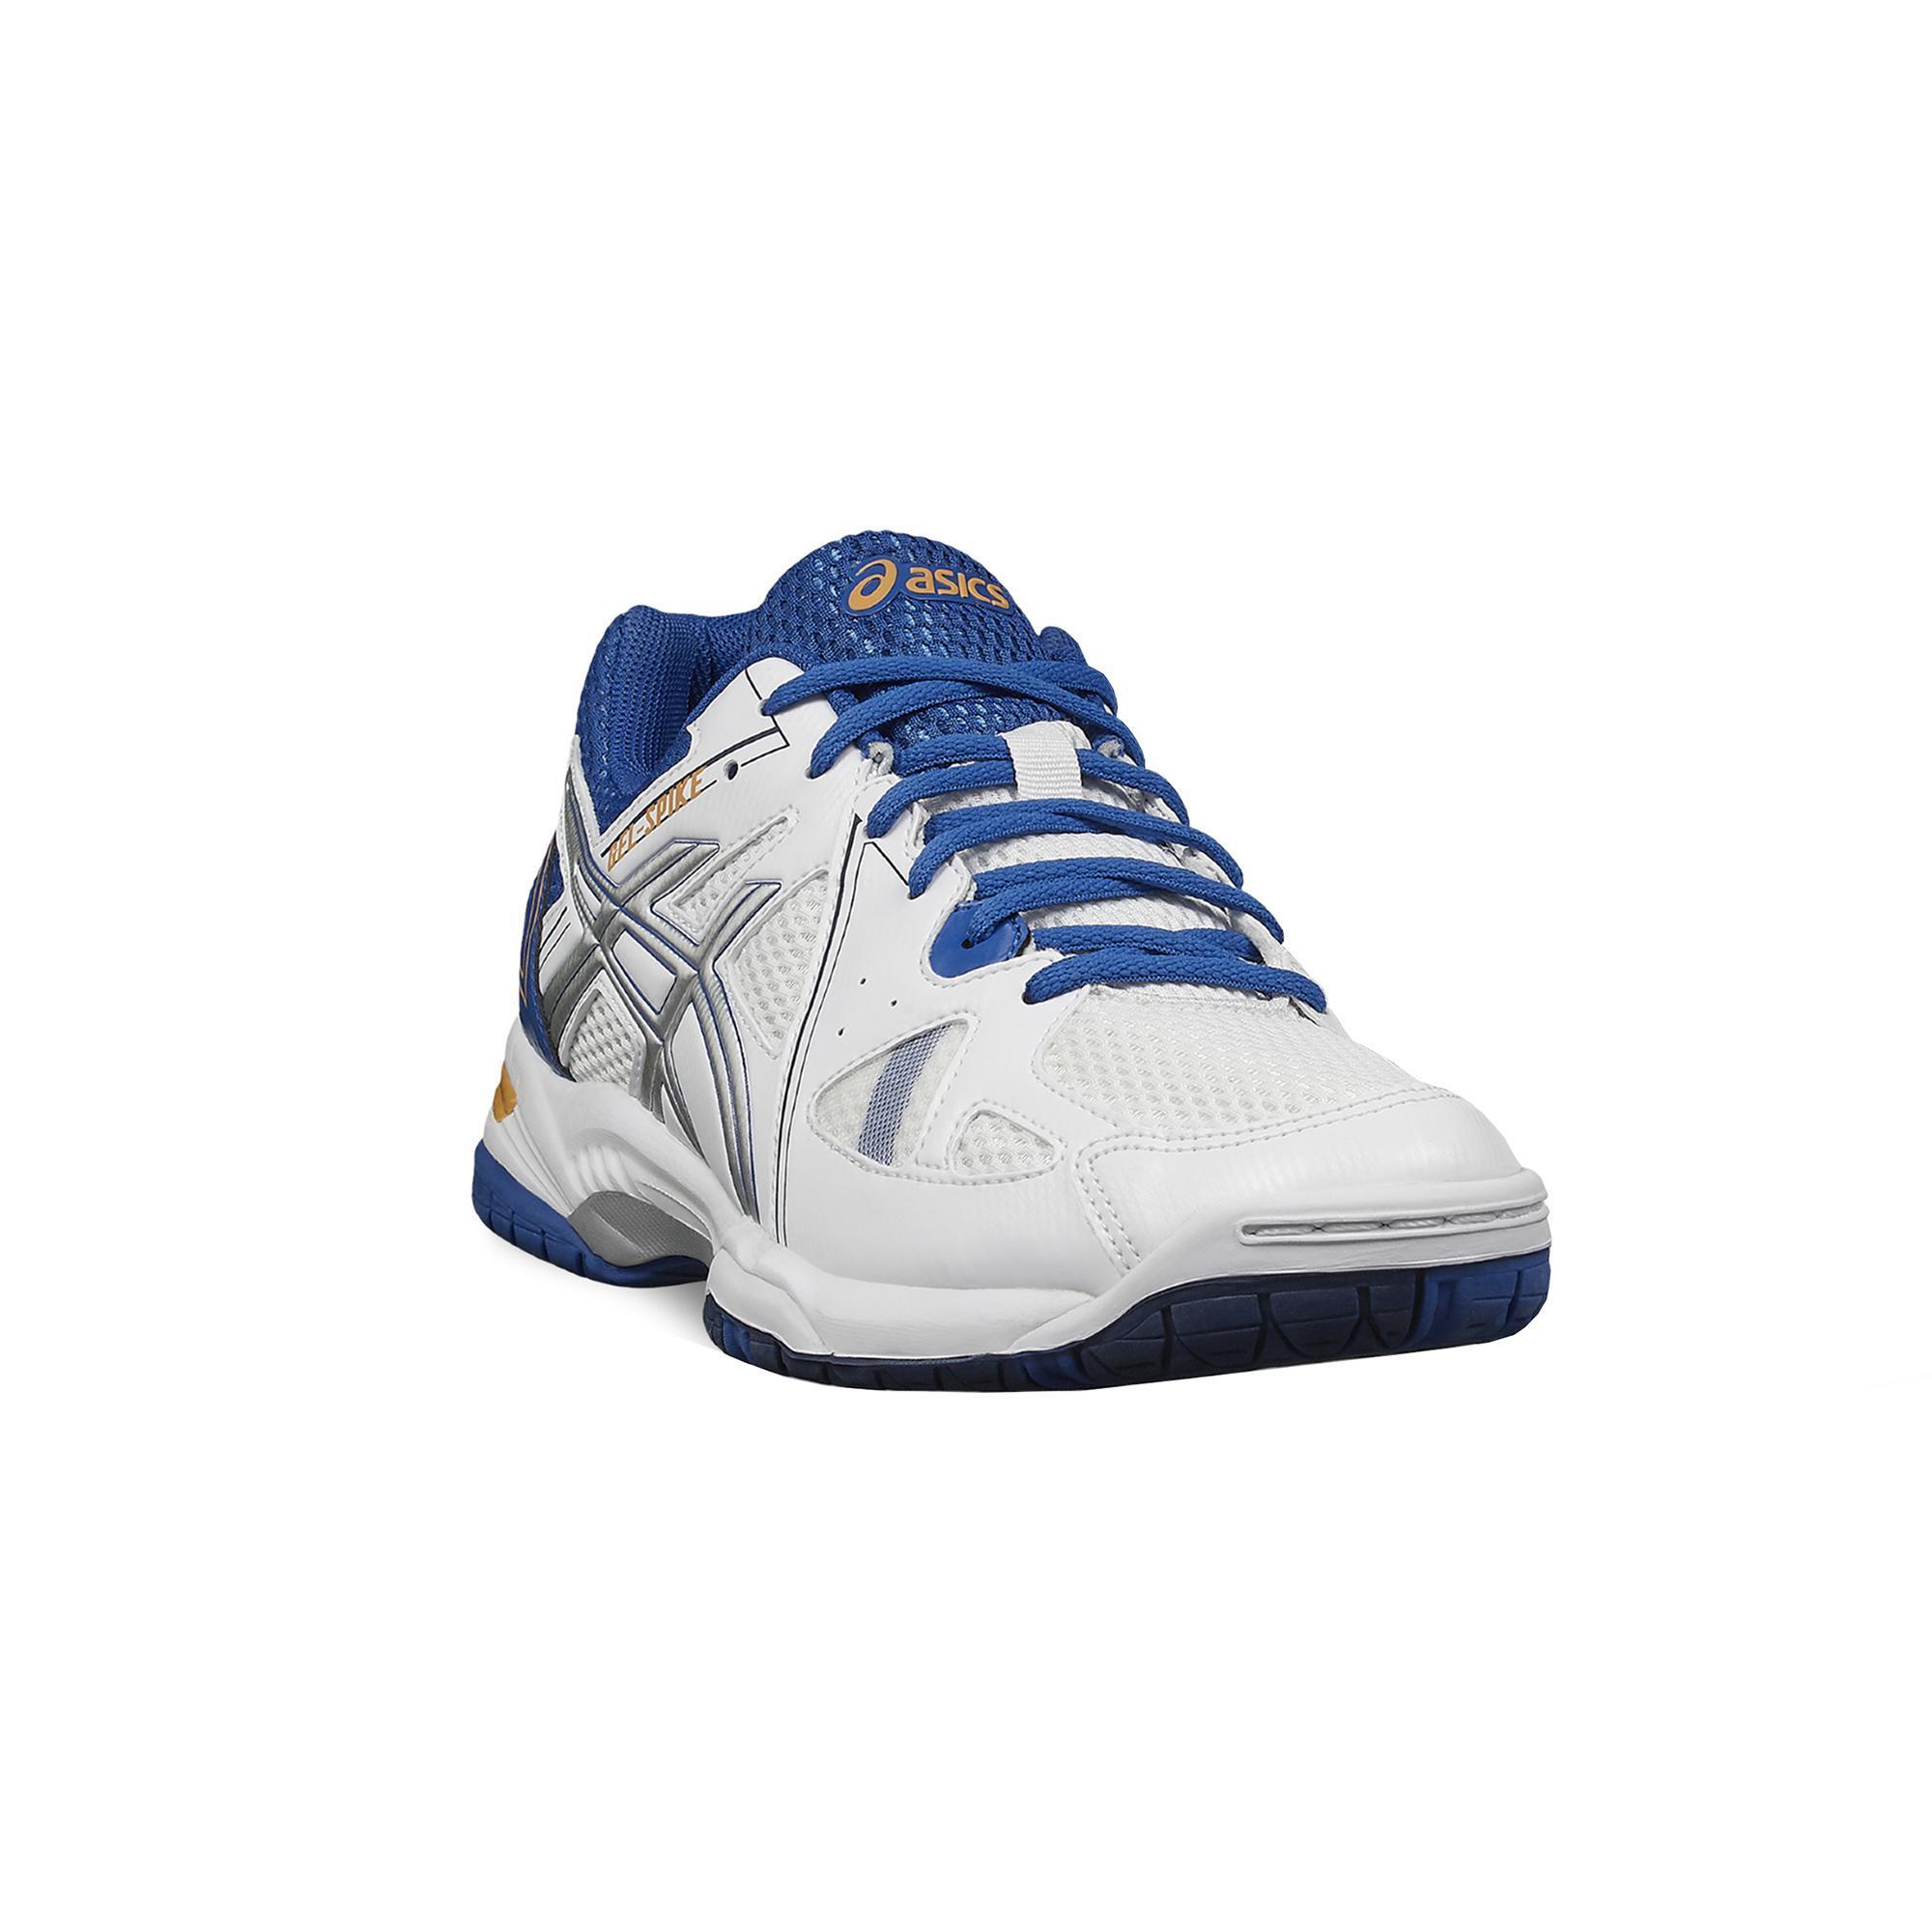 Gel Spike Volleyball Shoes - White/Blue 